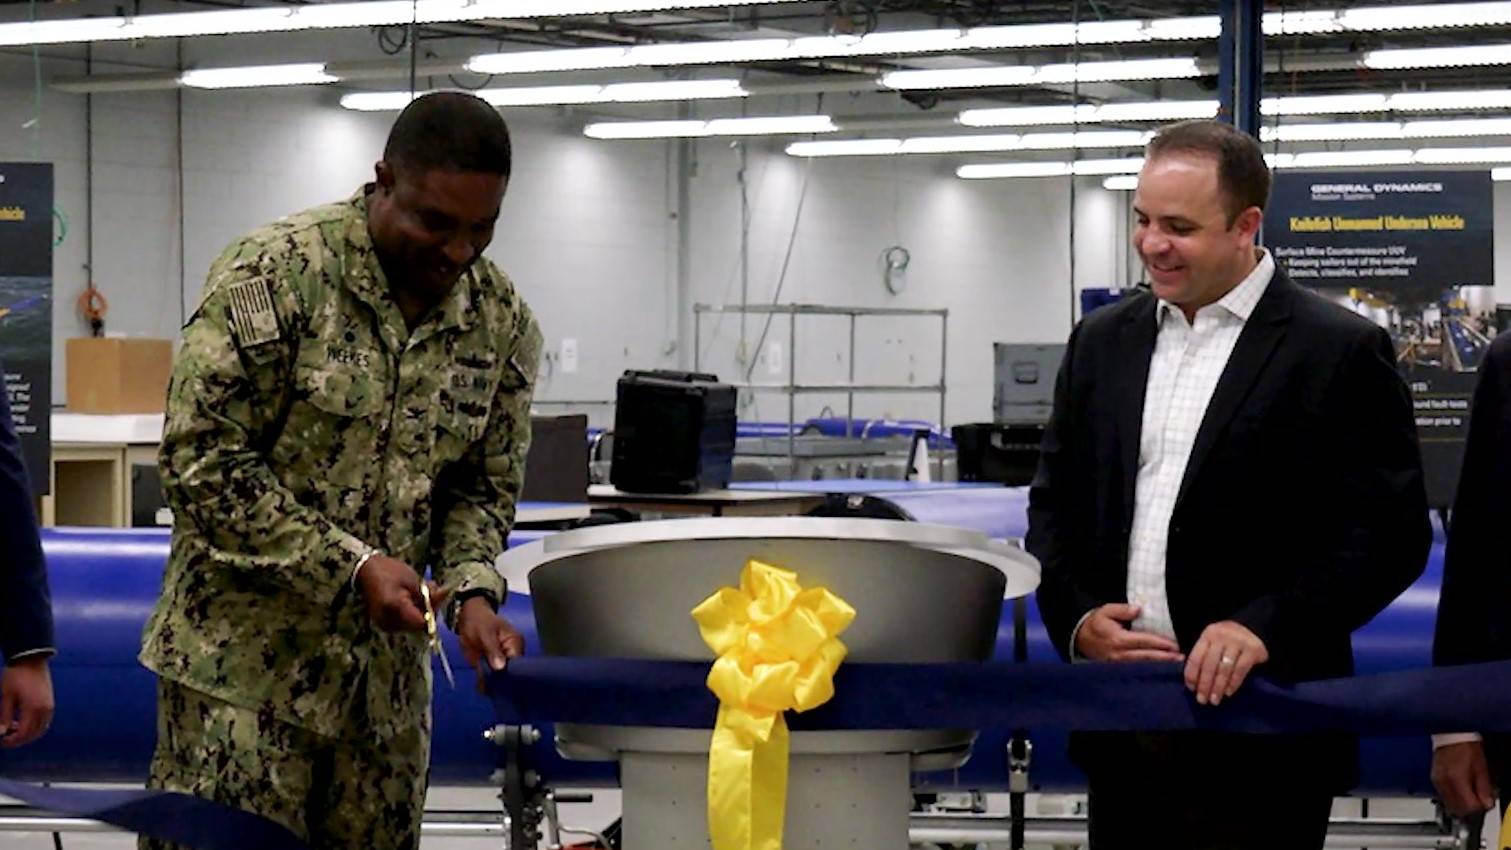 UUV Center of Excellence Ribbon Cutting